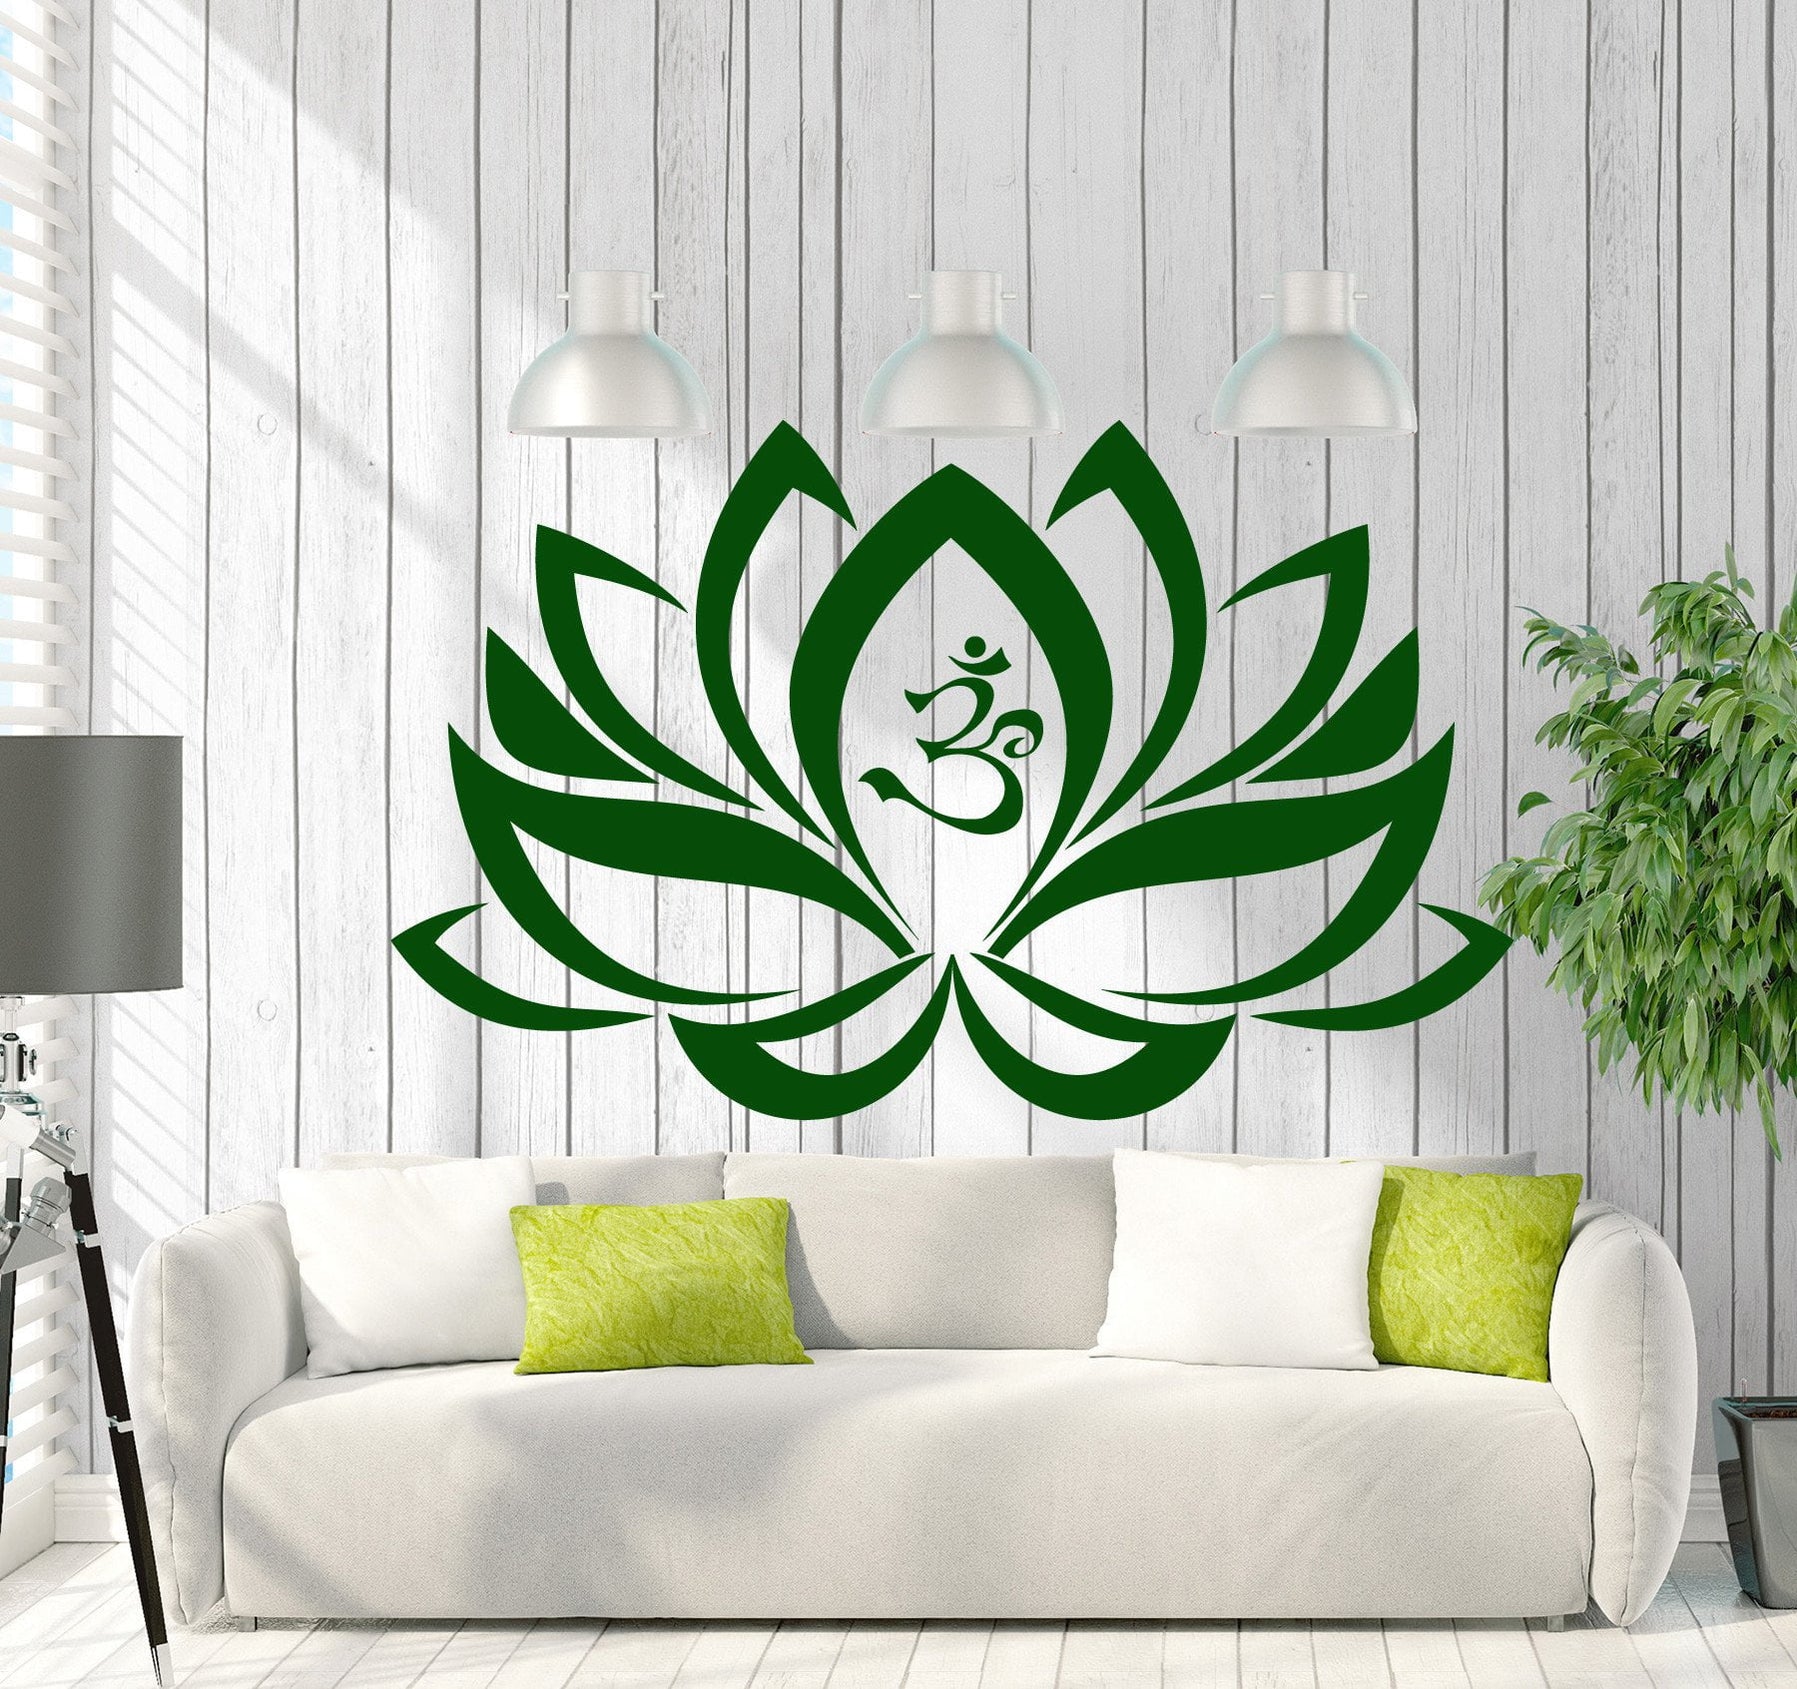 Wallstickers4you - Hight Quality Large Wall Vinyl Decals And Stickers